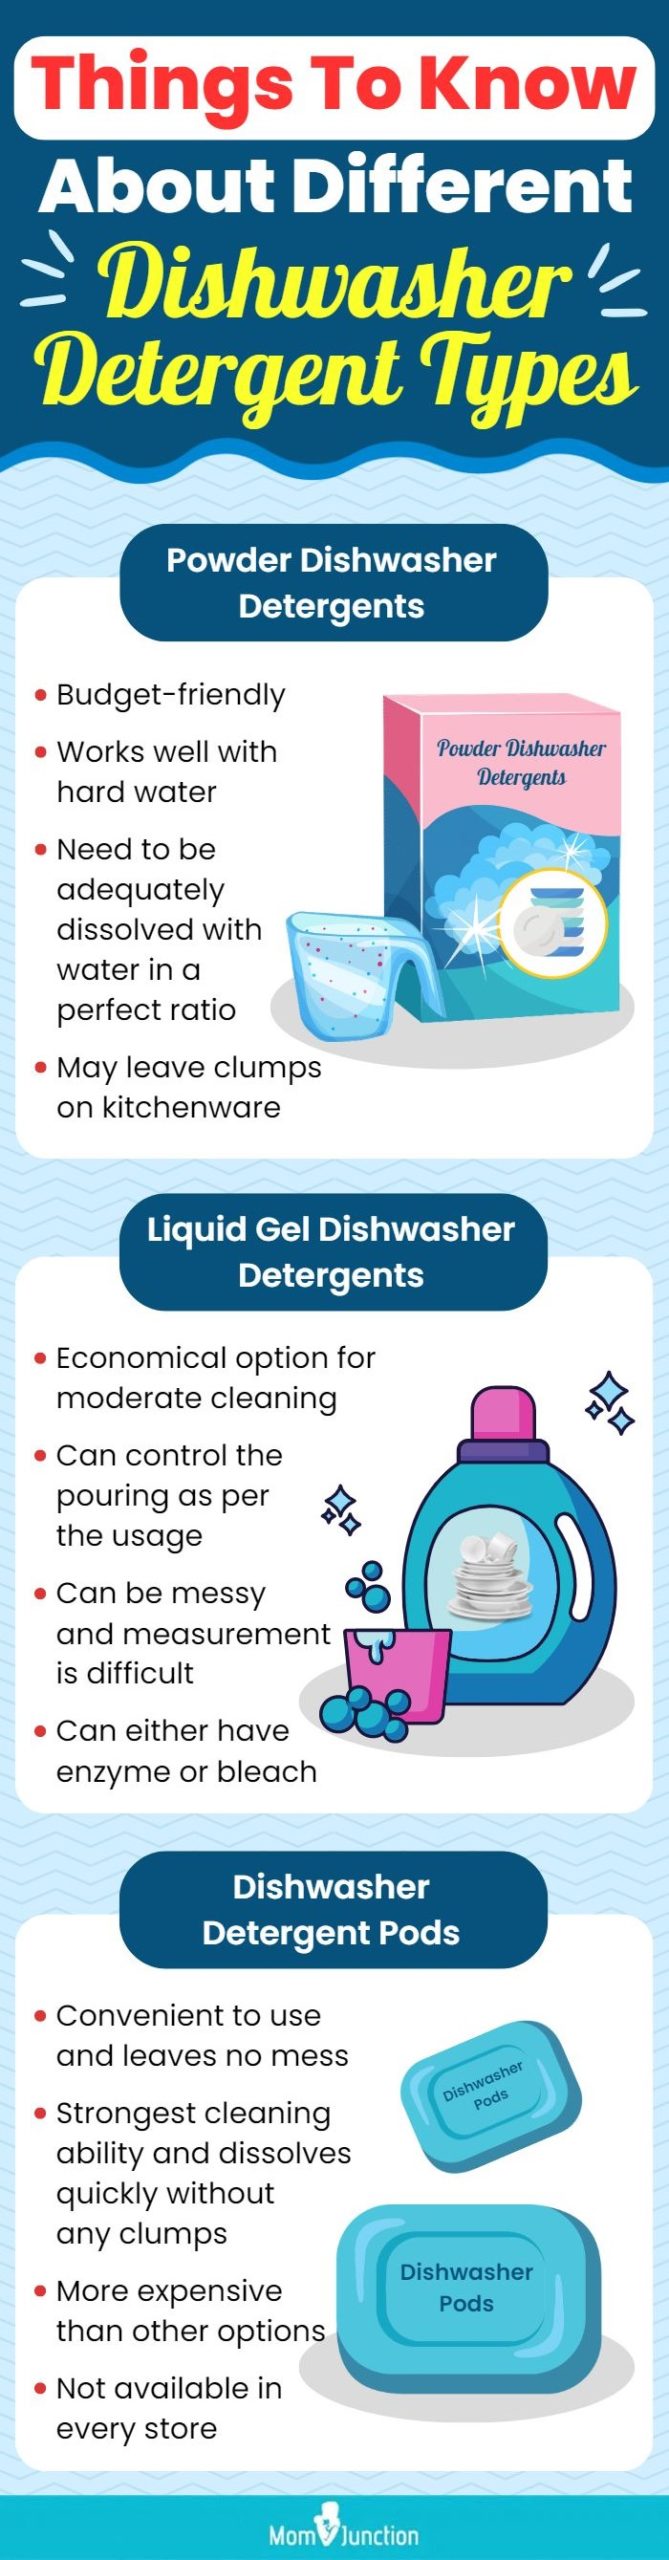 Things To Know About Different Dishwasher Detergent Types (infographic)